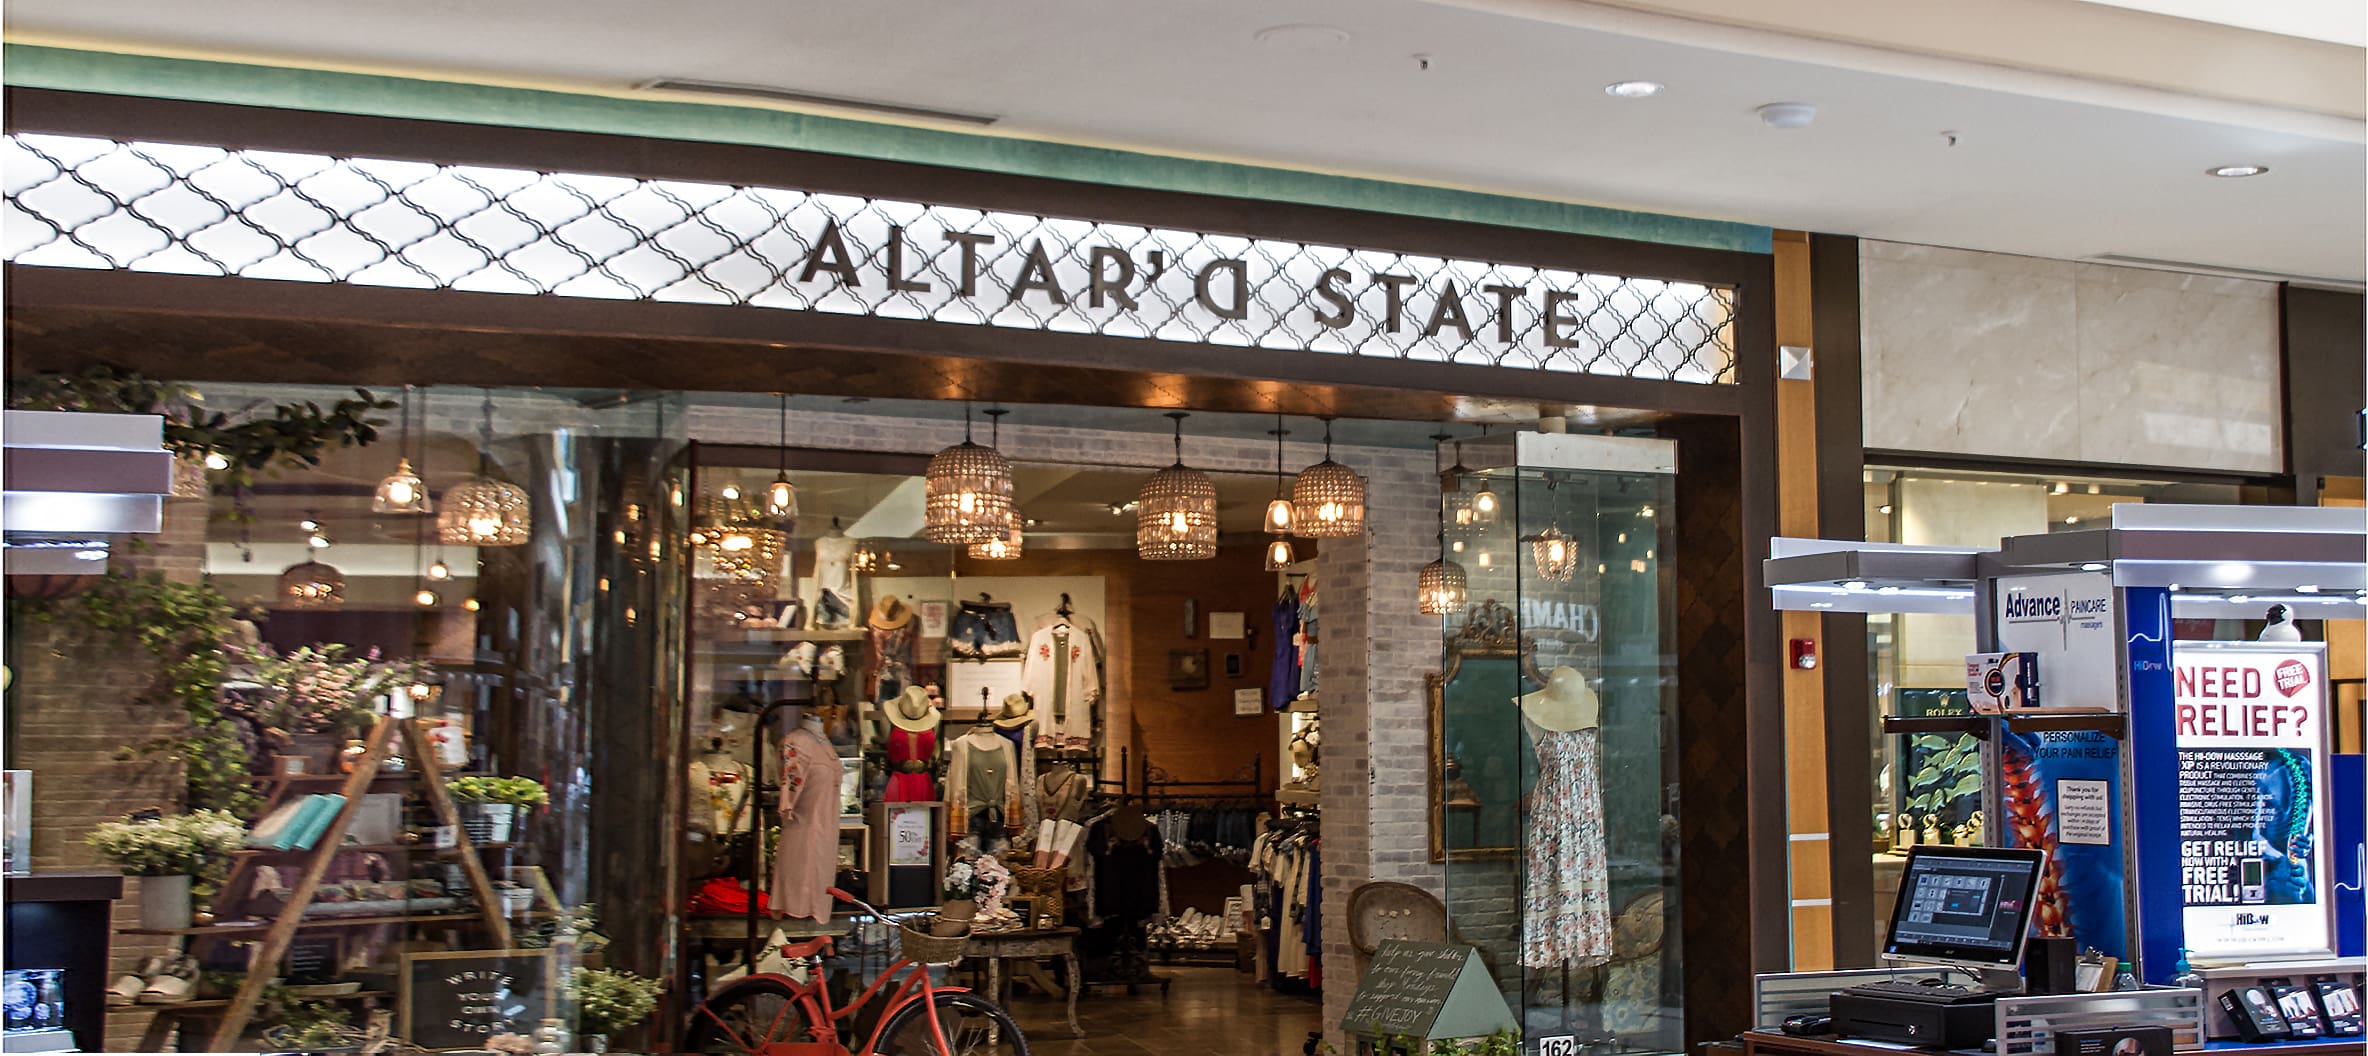 How To View The Remaining Balance Of Your Altard State Gift Card?